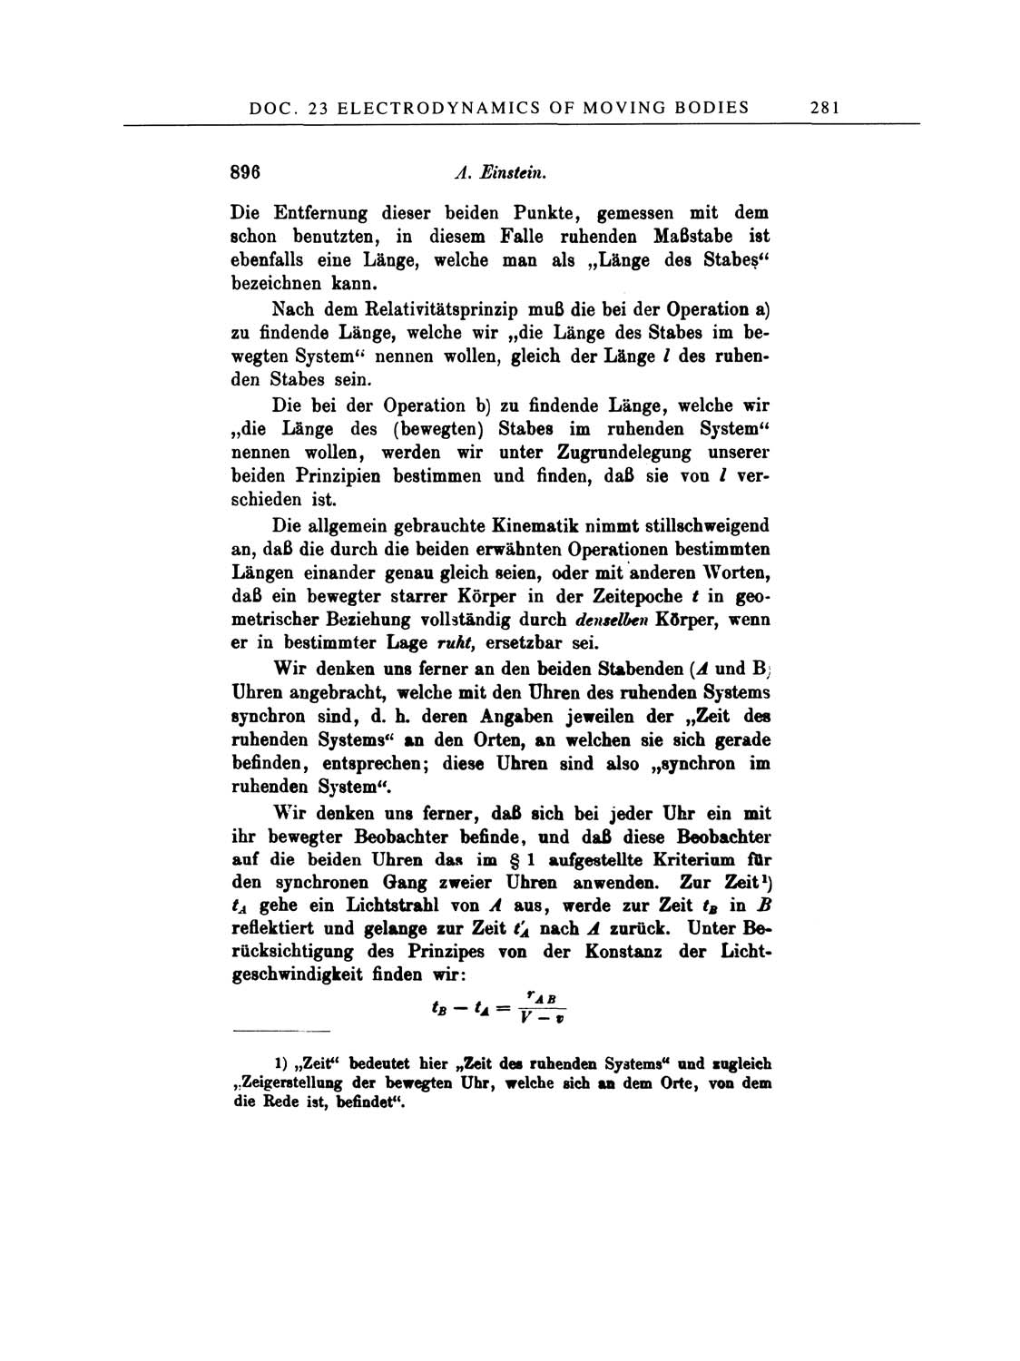 Volume 2: The Swiss Years: Writings, 1900-1909 page 281